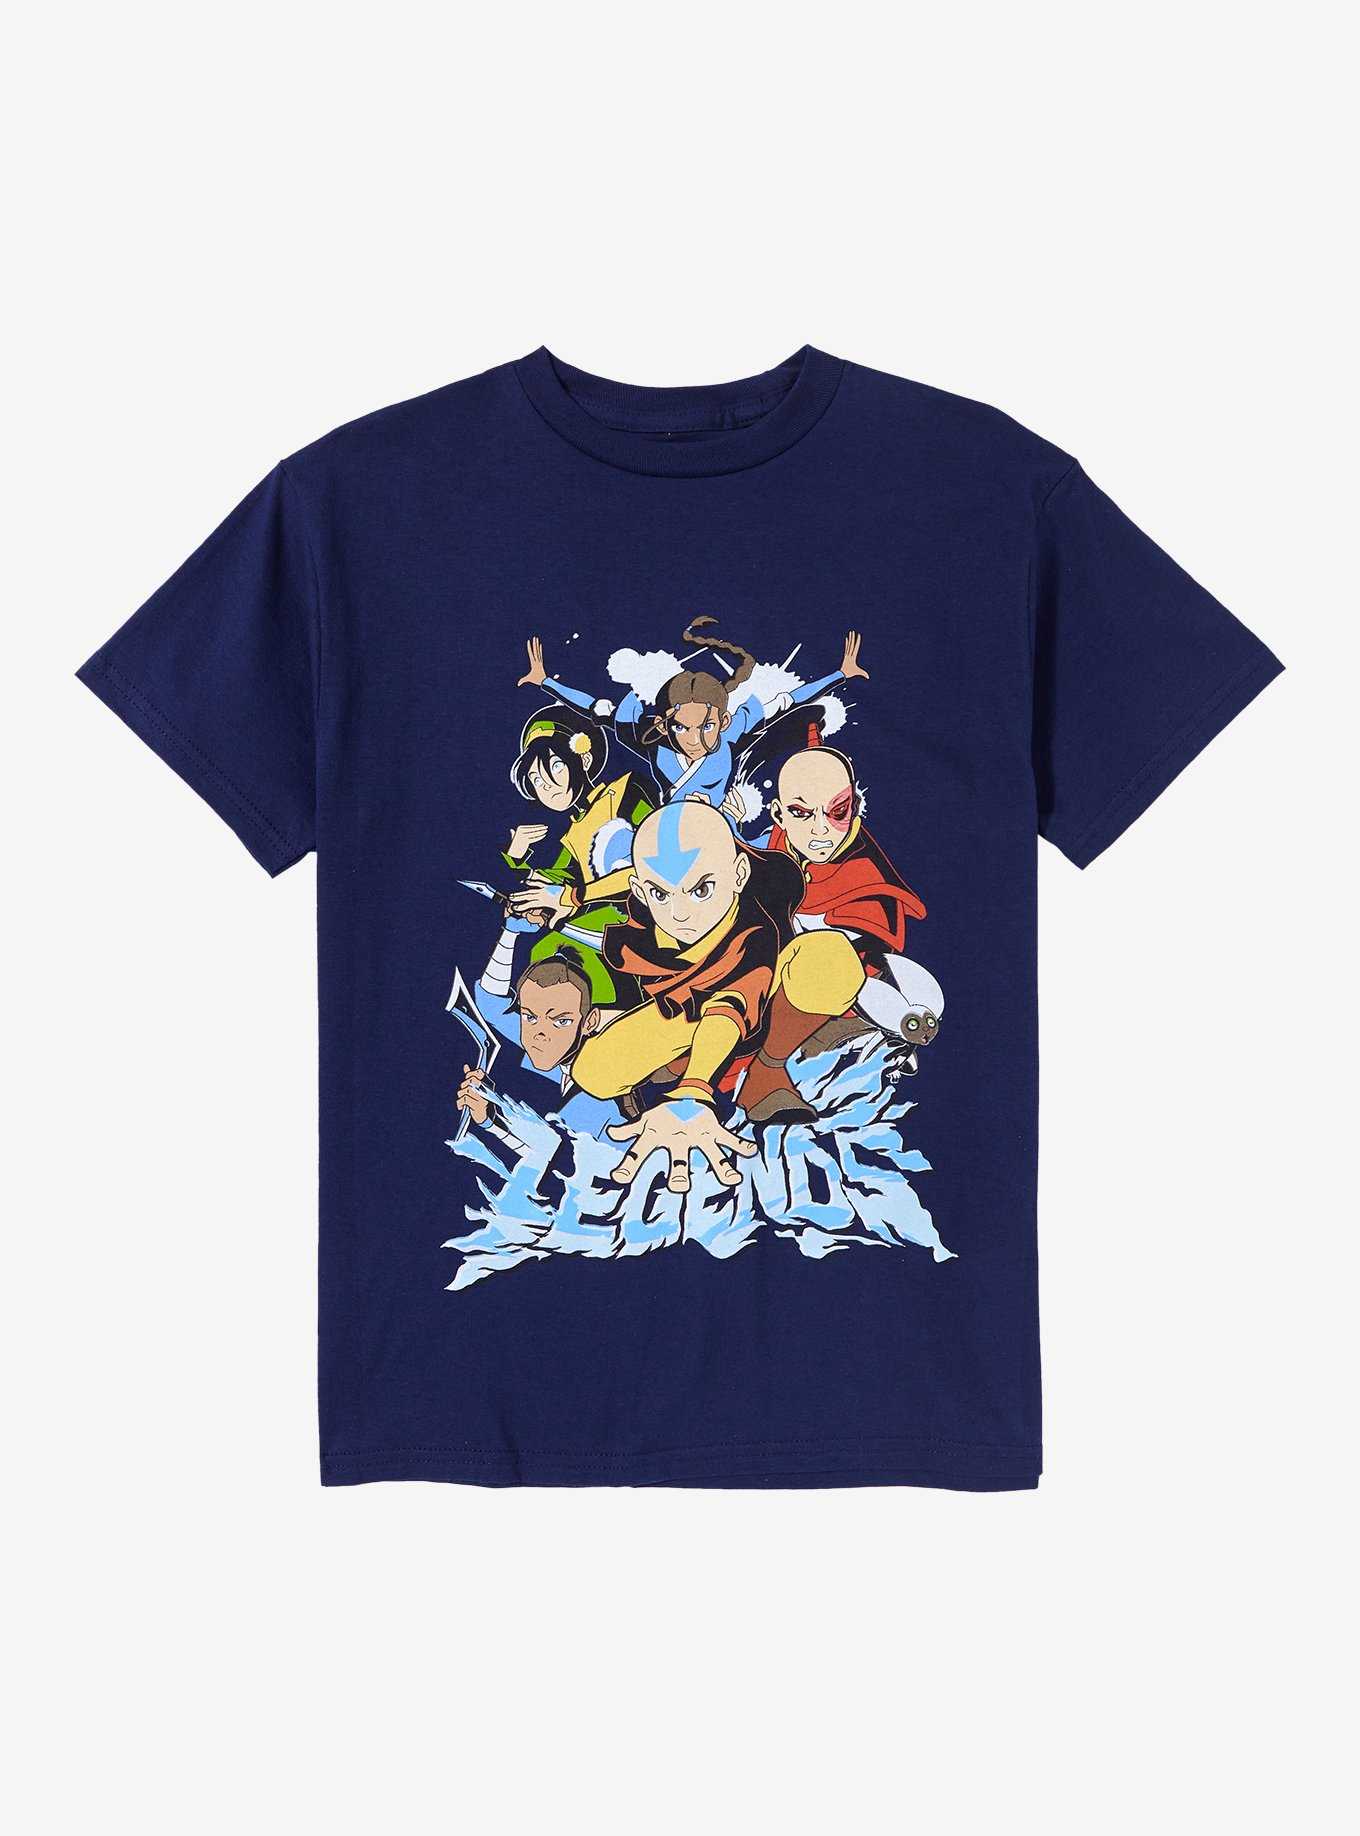 Avatar: The Last Airbender Group Portrait Youth T-Shirt, , hi-res